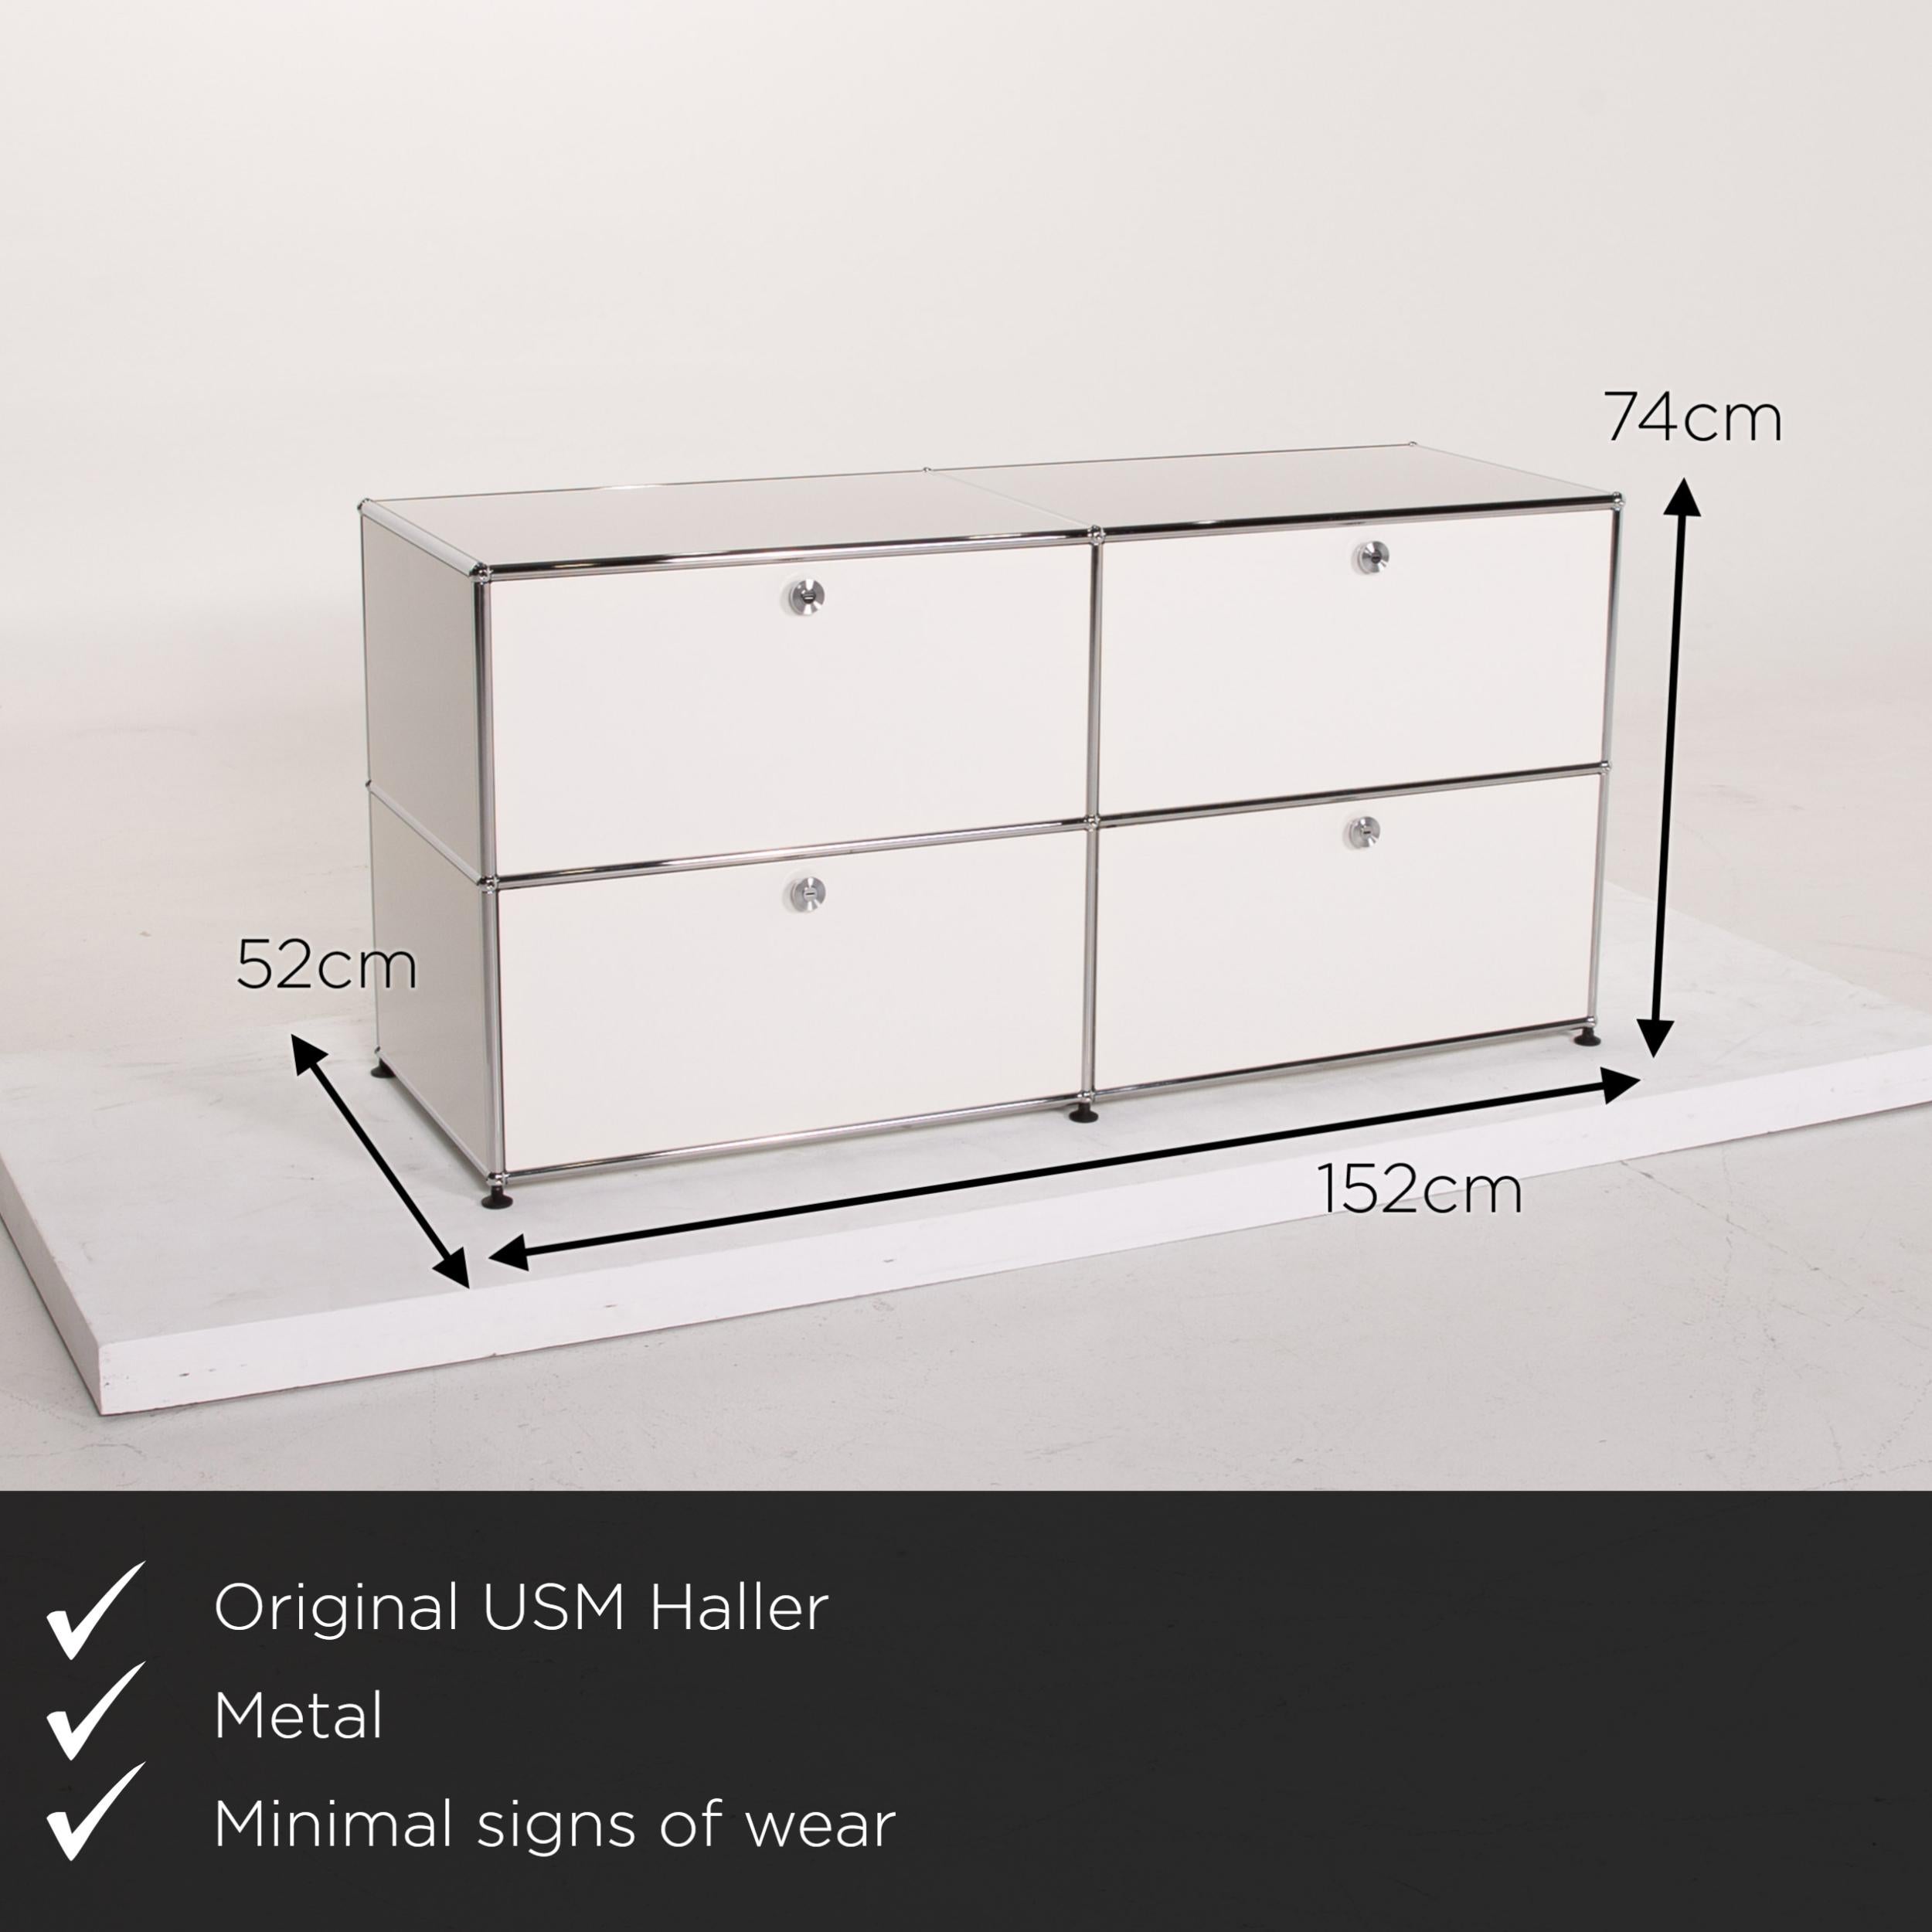 We present to you an Usm Haller metal sideboard white cabinet office furniture.
   
 

 Product measurements in centimeters:
 

Depth 52
Width 152
Height 74.




   